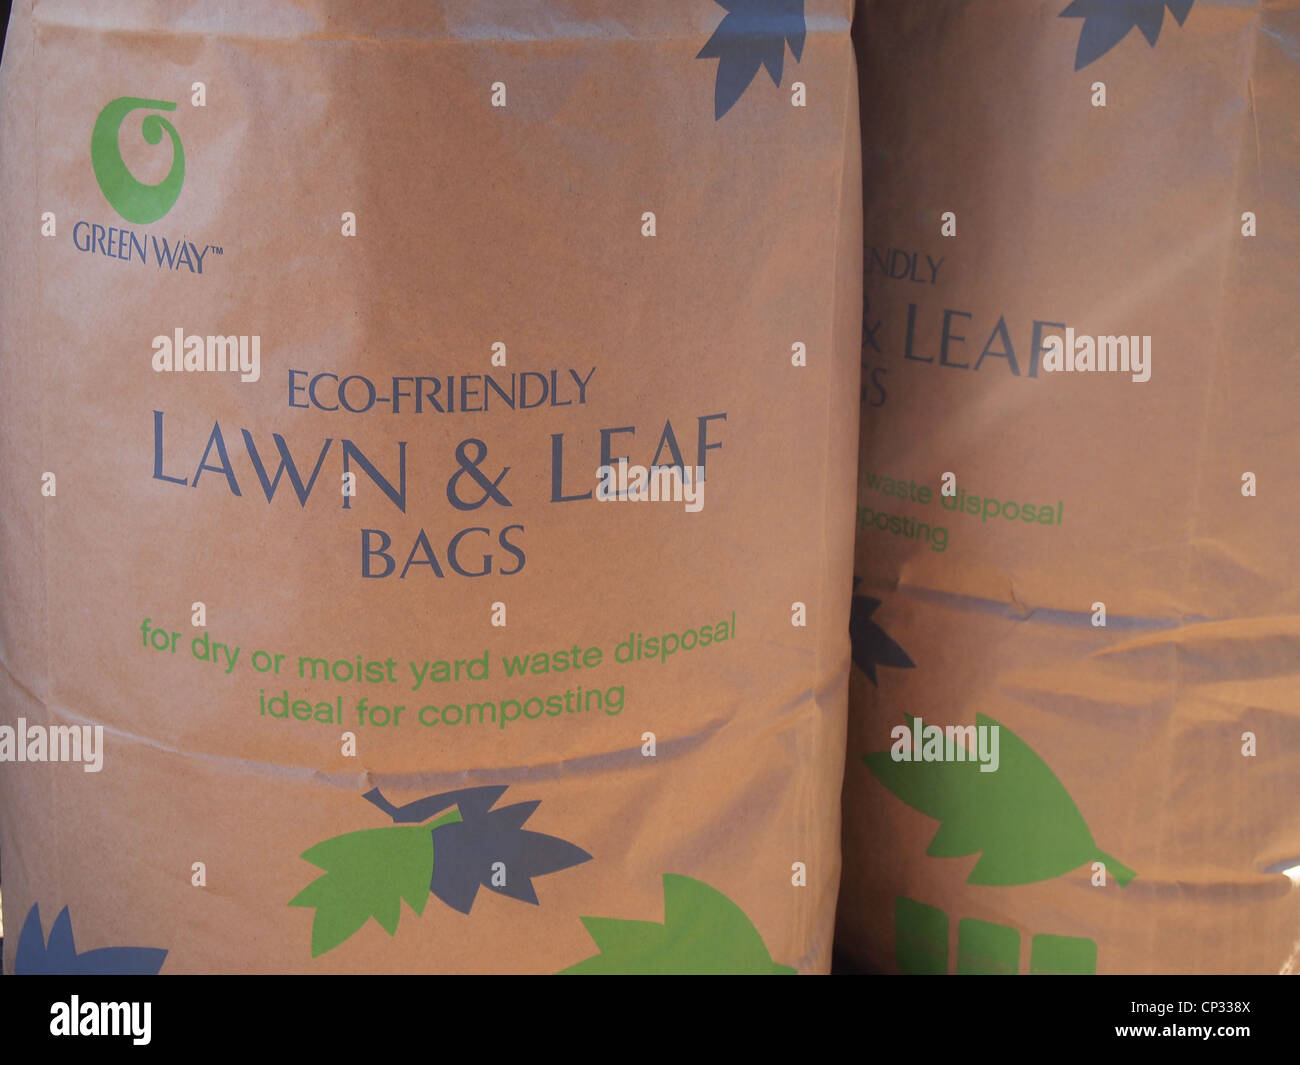 https://c8.alamy.com/comp/CP338X/eco-friendly-lawn-and-leaf-bags-left-curbside-for-collection-yonkers-CP338X.jpg